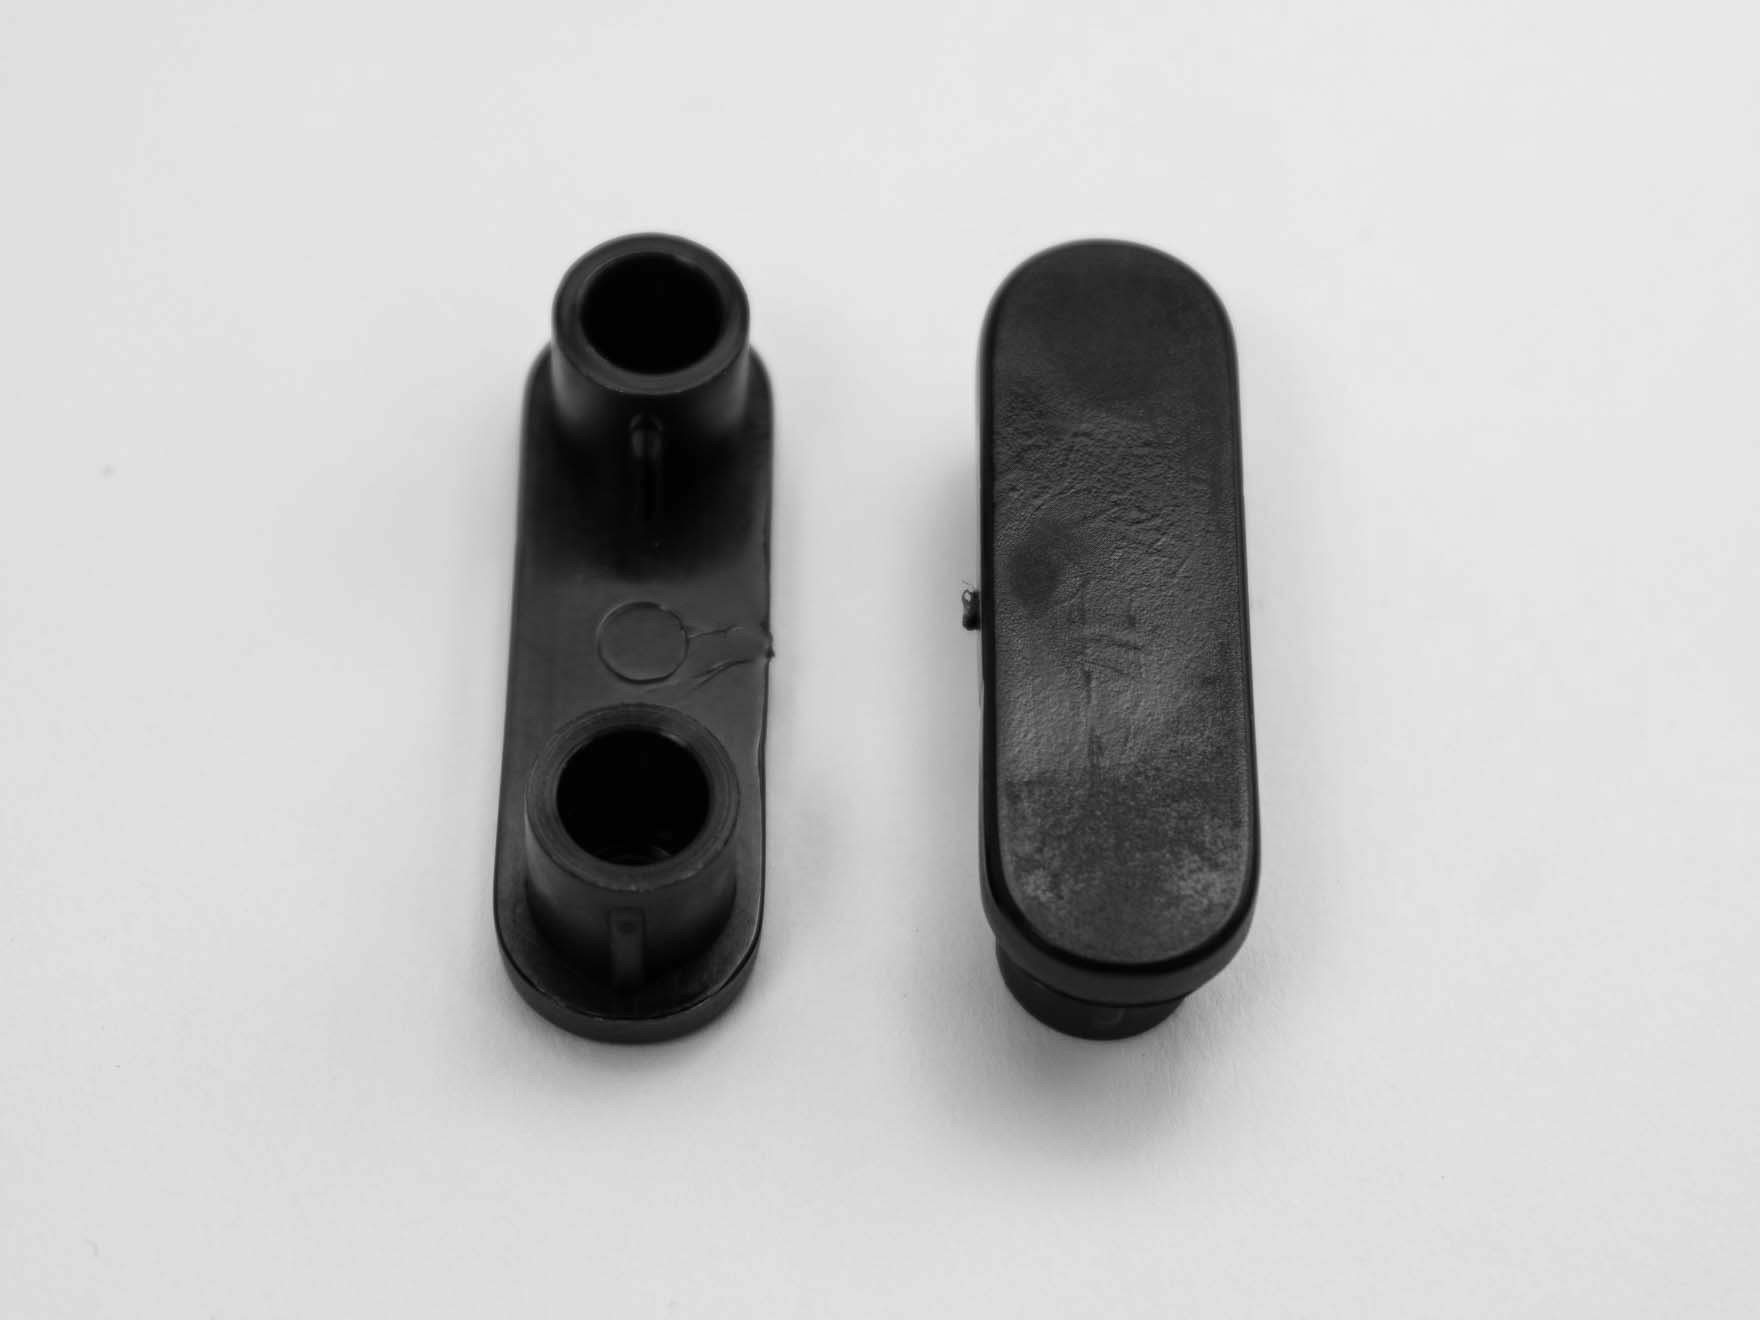 8 Racetrack Shaped Insert Glides Fits 1-7/8'' x 9/16'' O.D. Patio Tubes/Legs